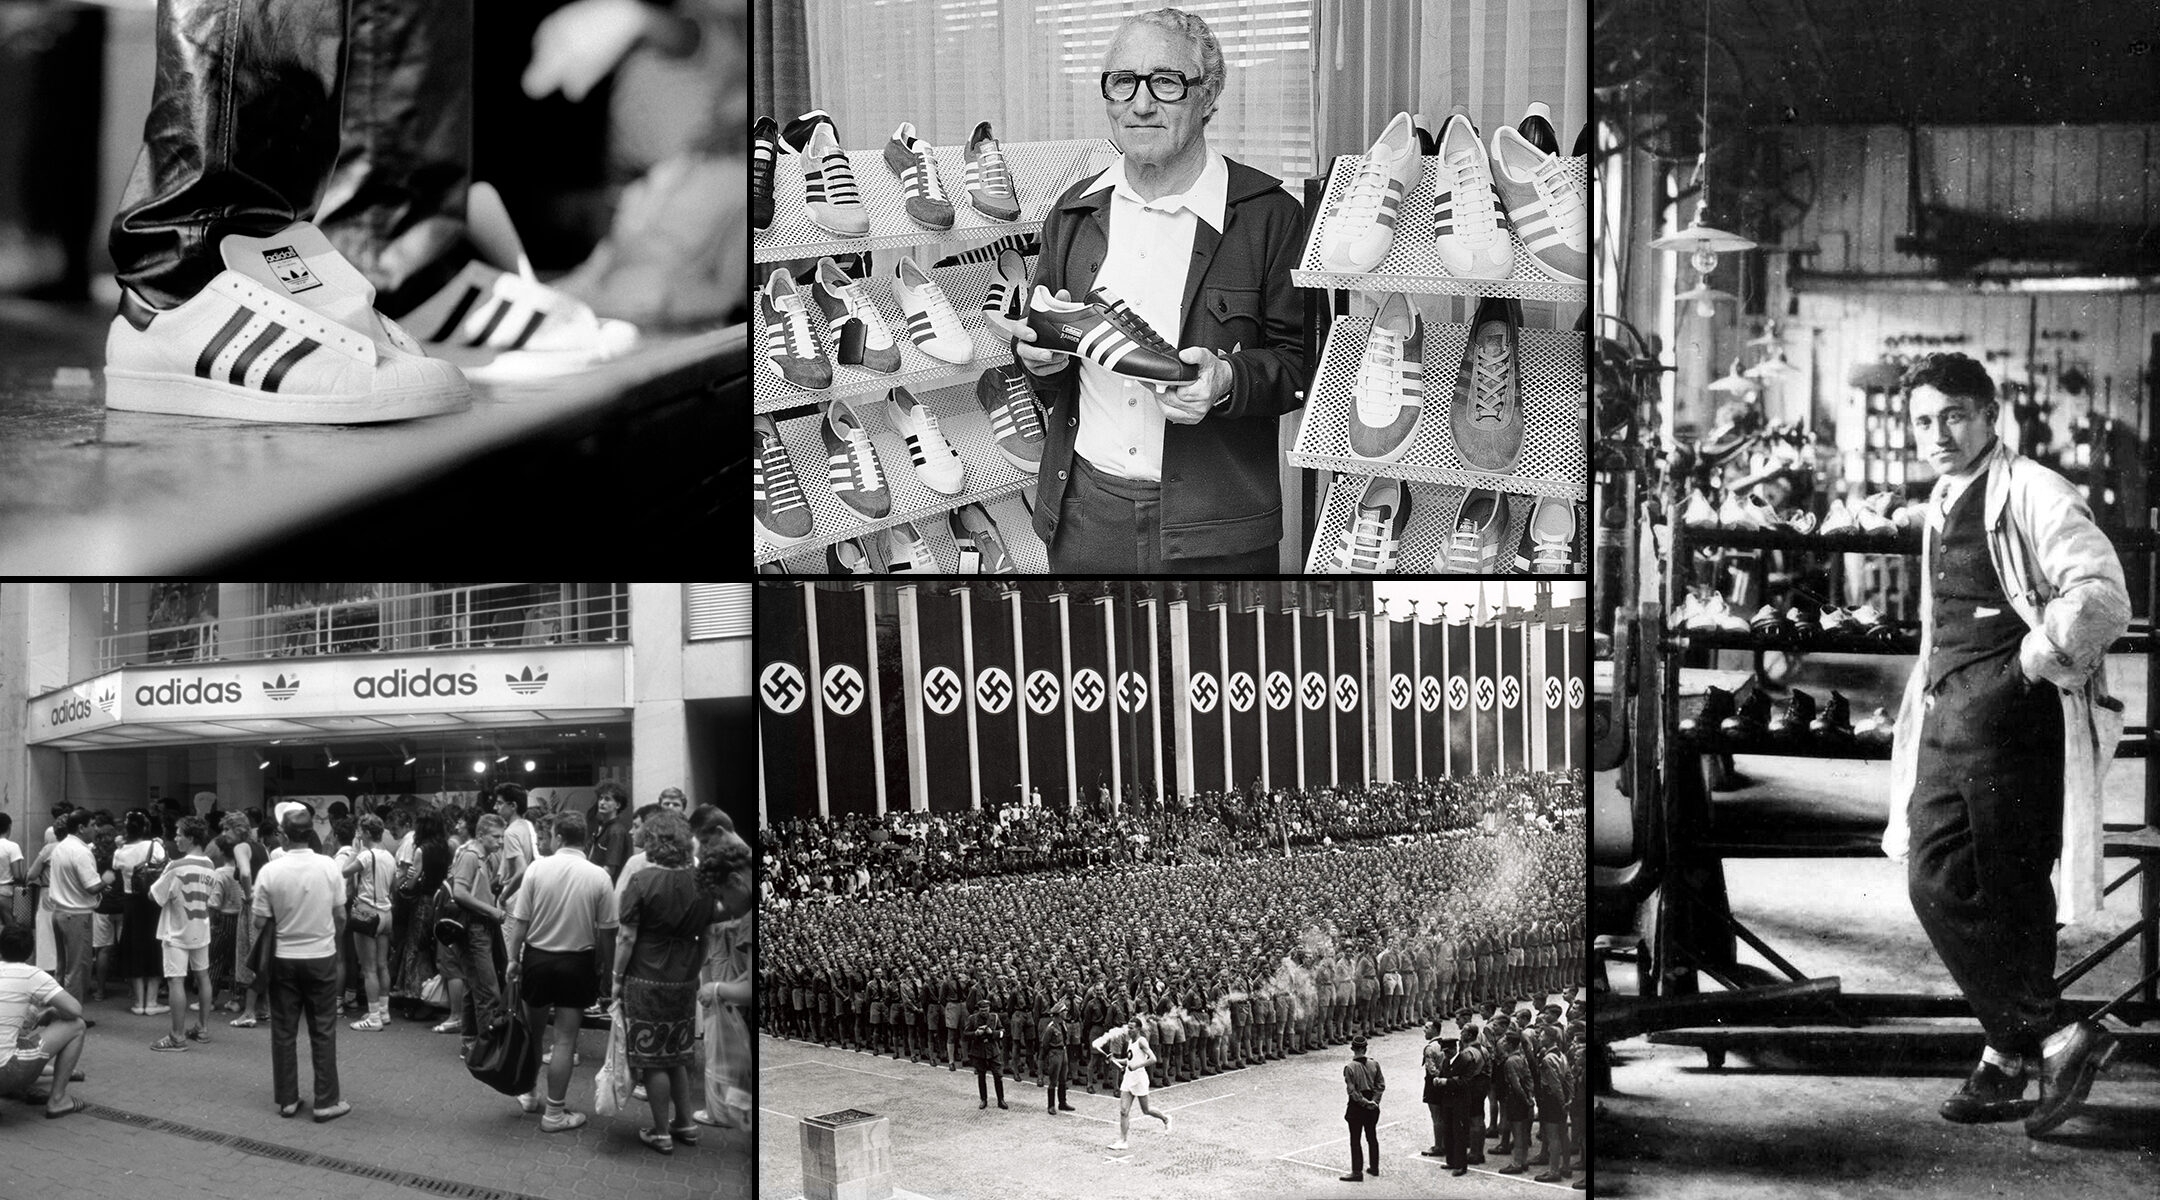 Was Adidas Founded by Nazi?